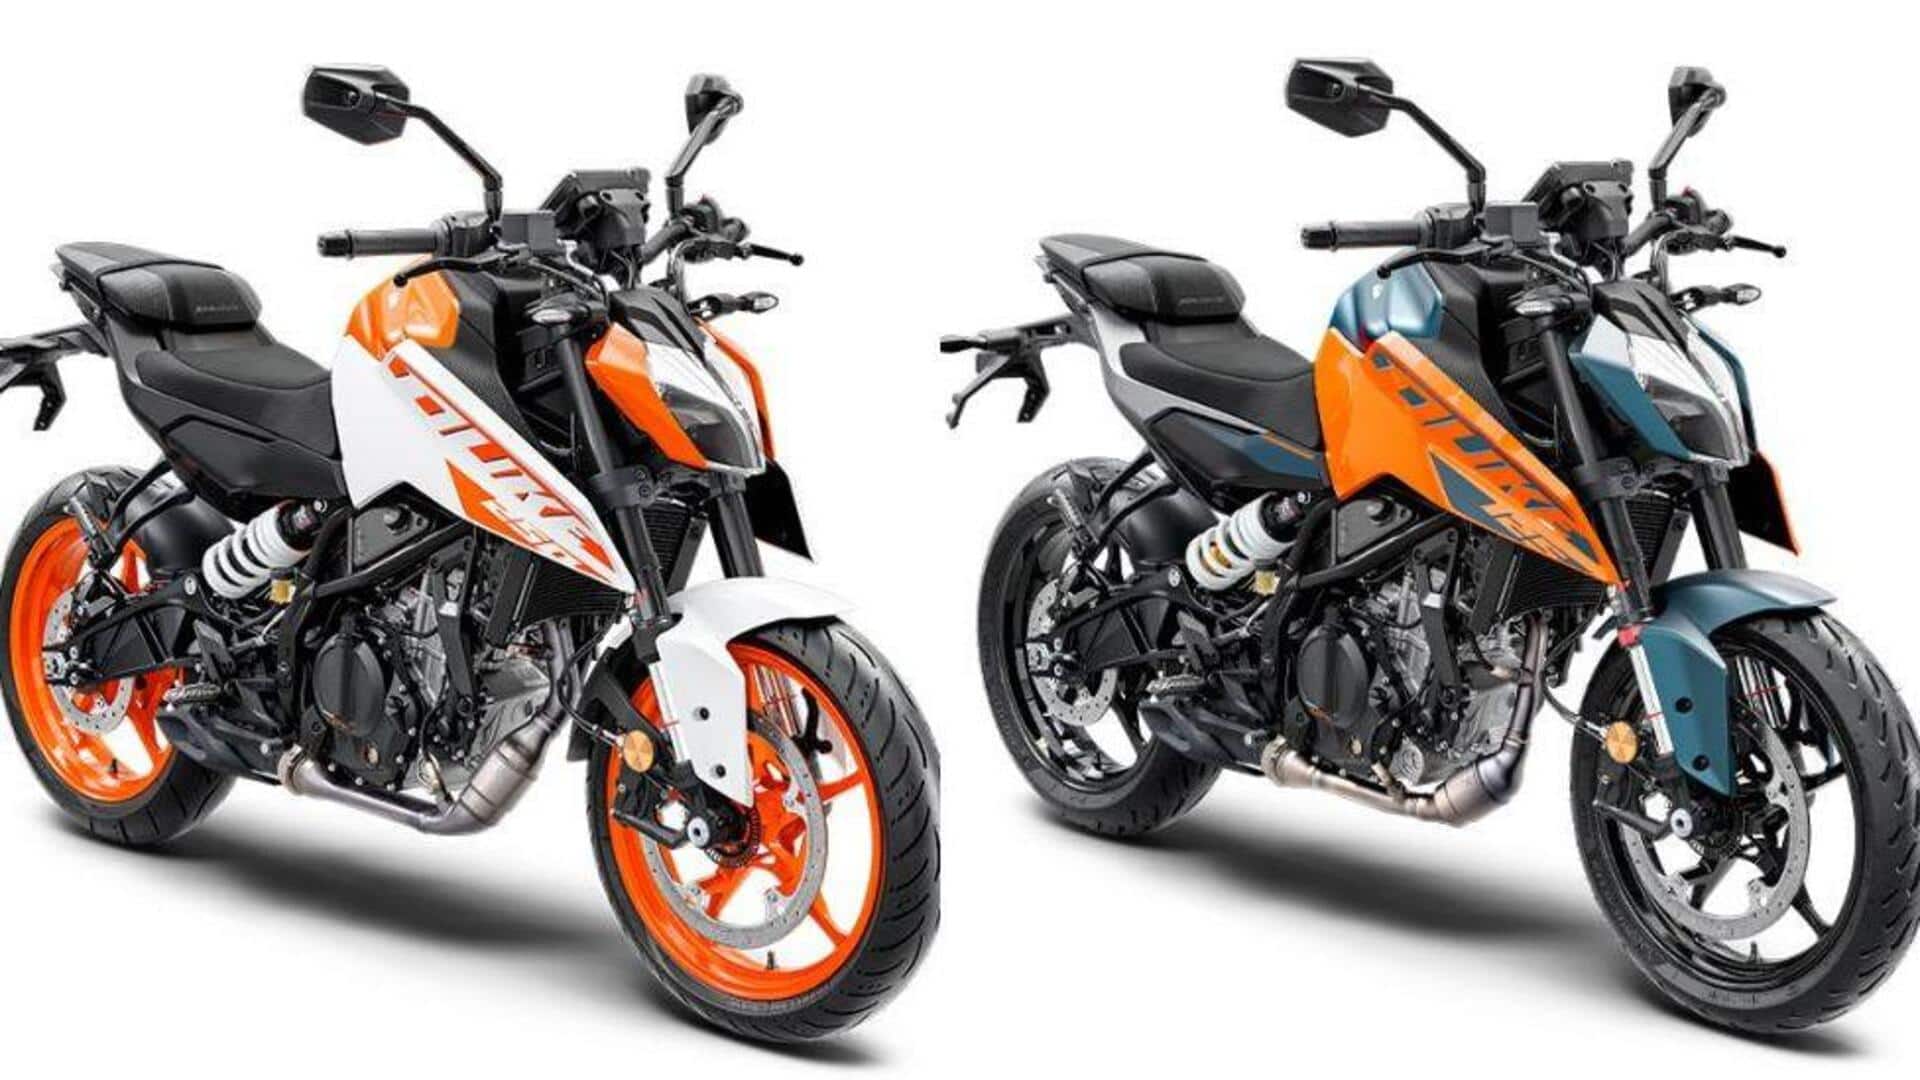 KTM updates 250 Duke and 125 Duke with new features